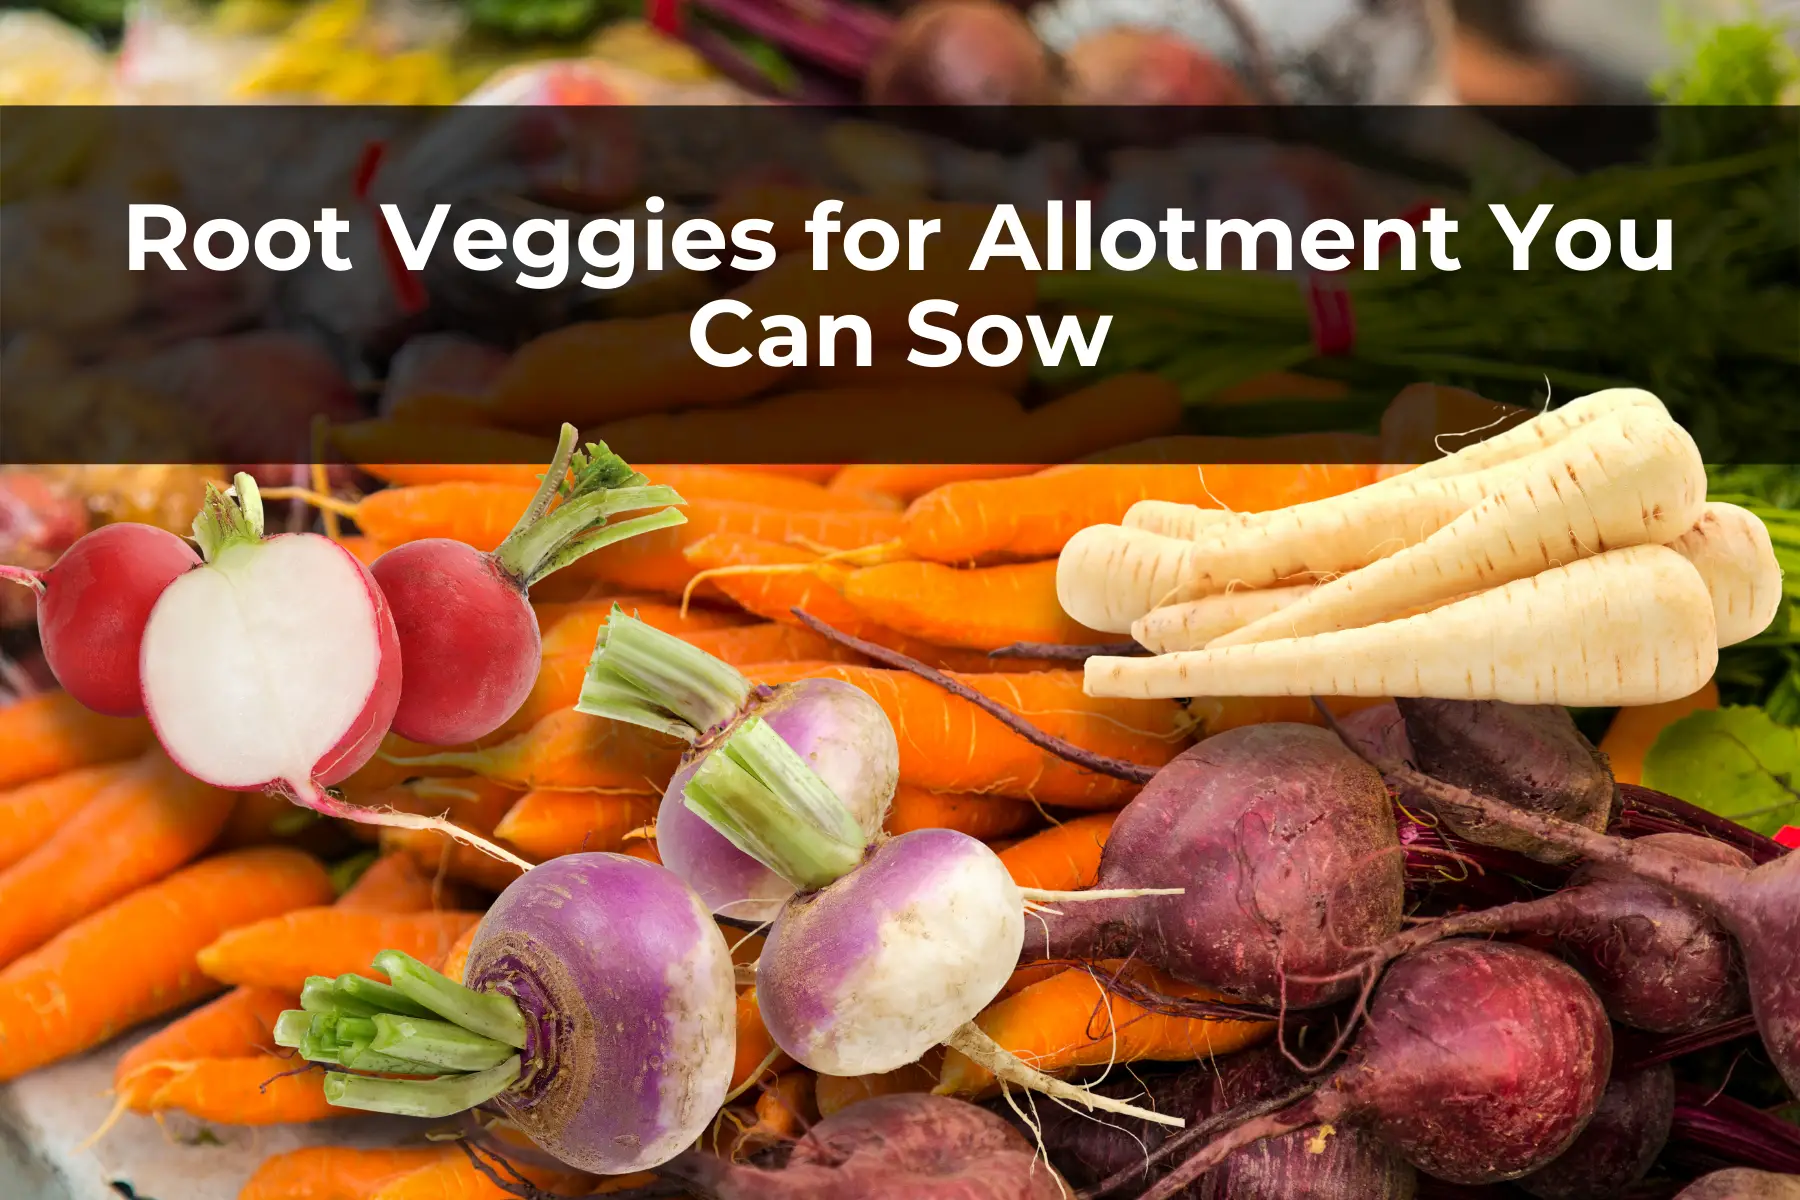 Root Veggies for Allotment You Can Sow